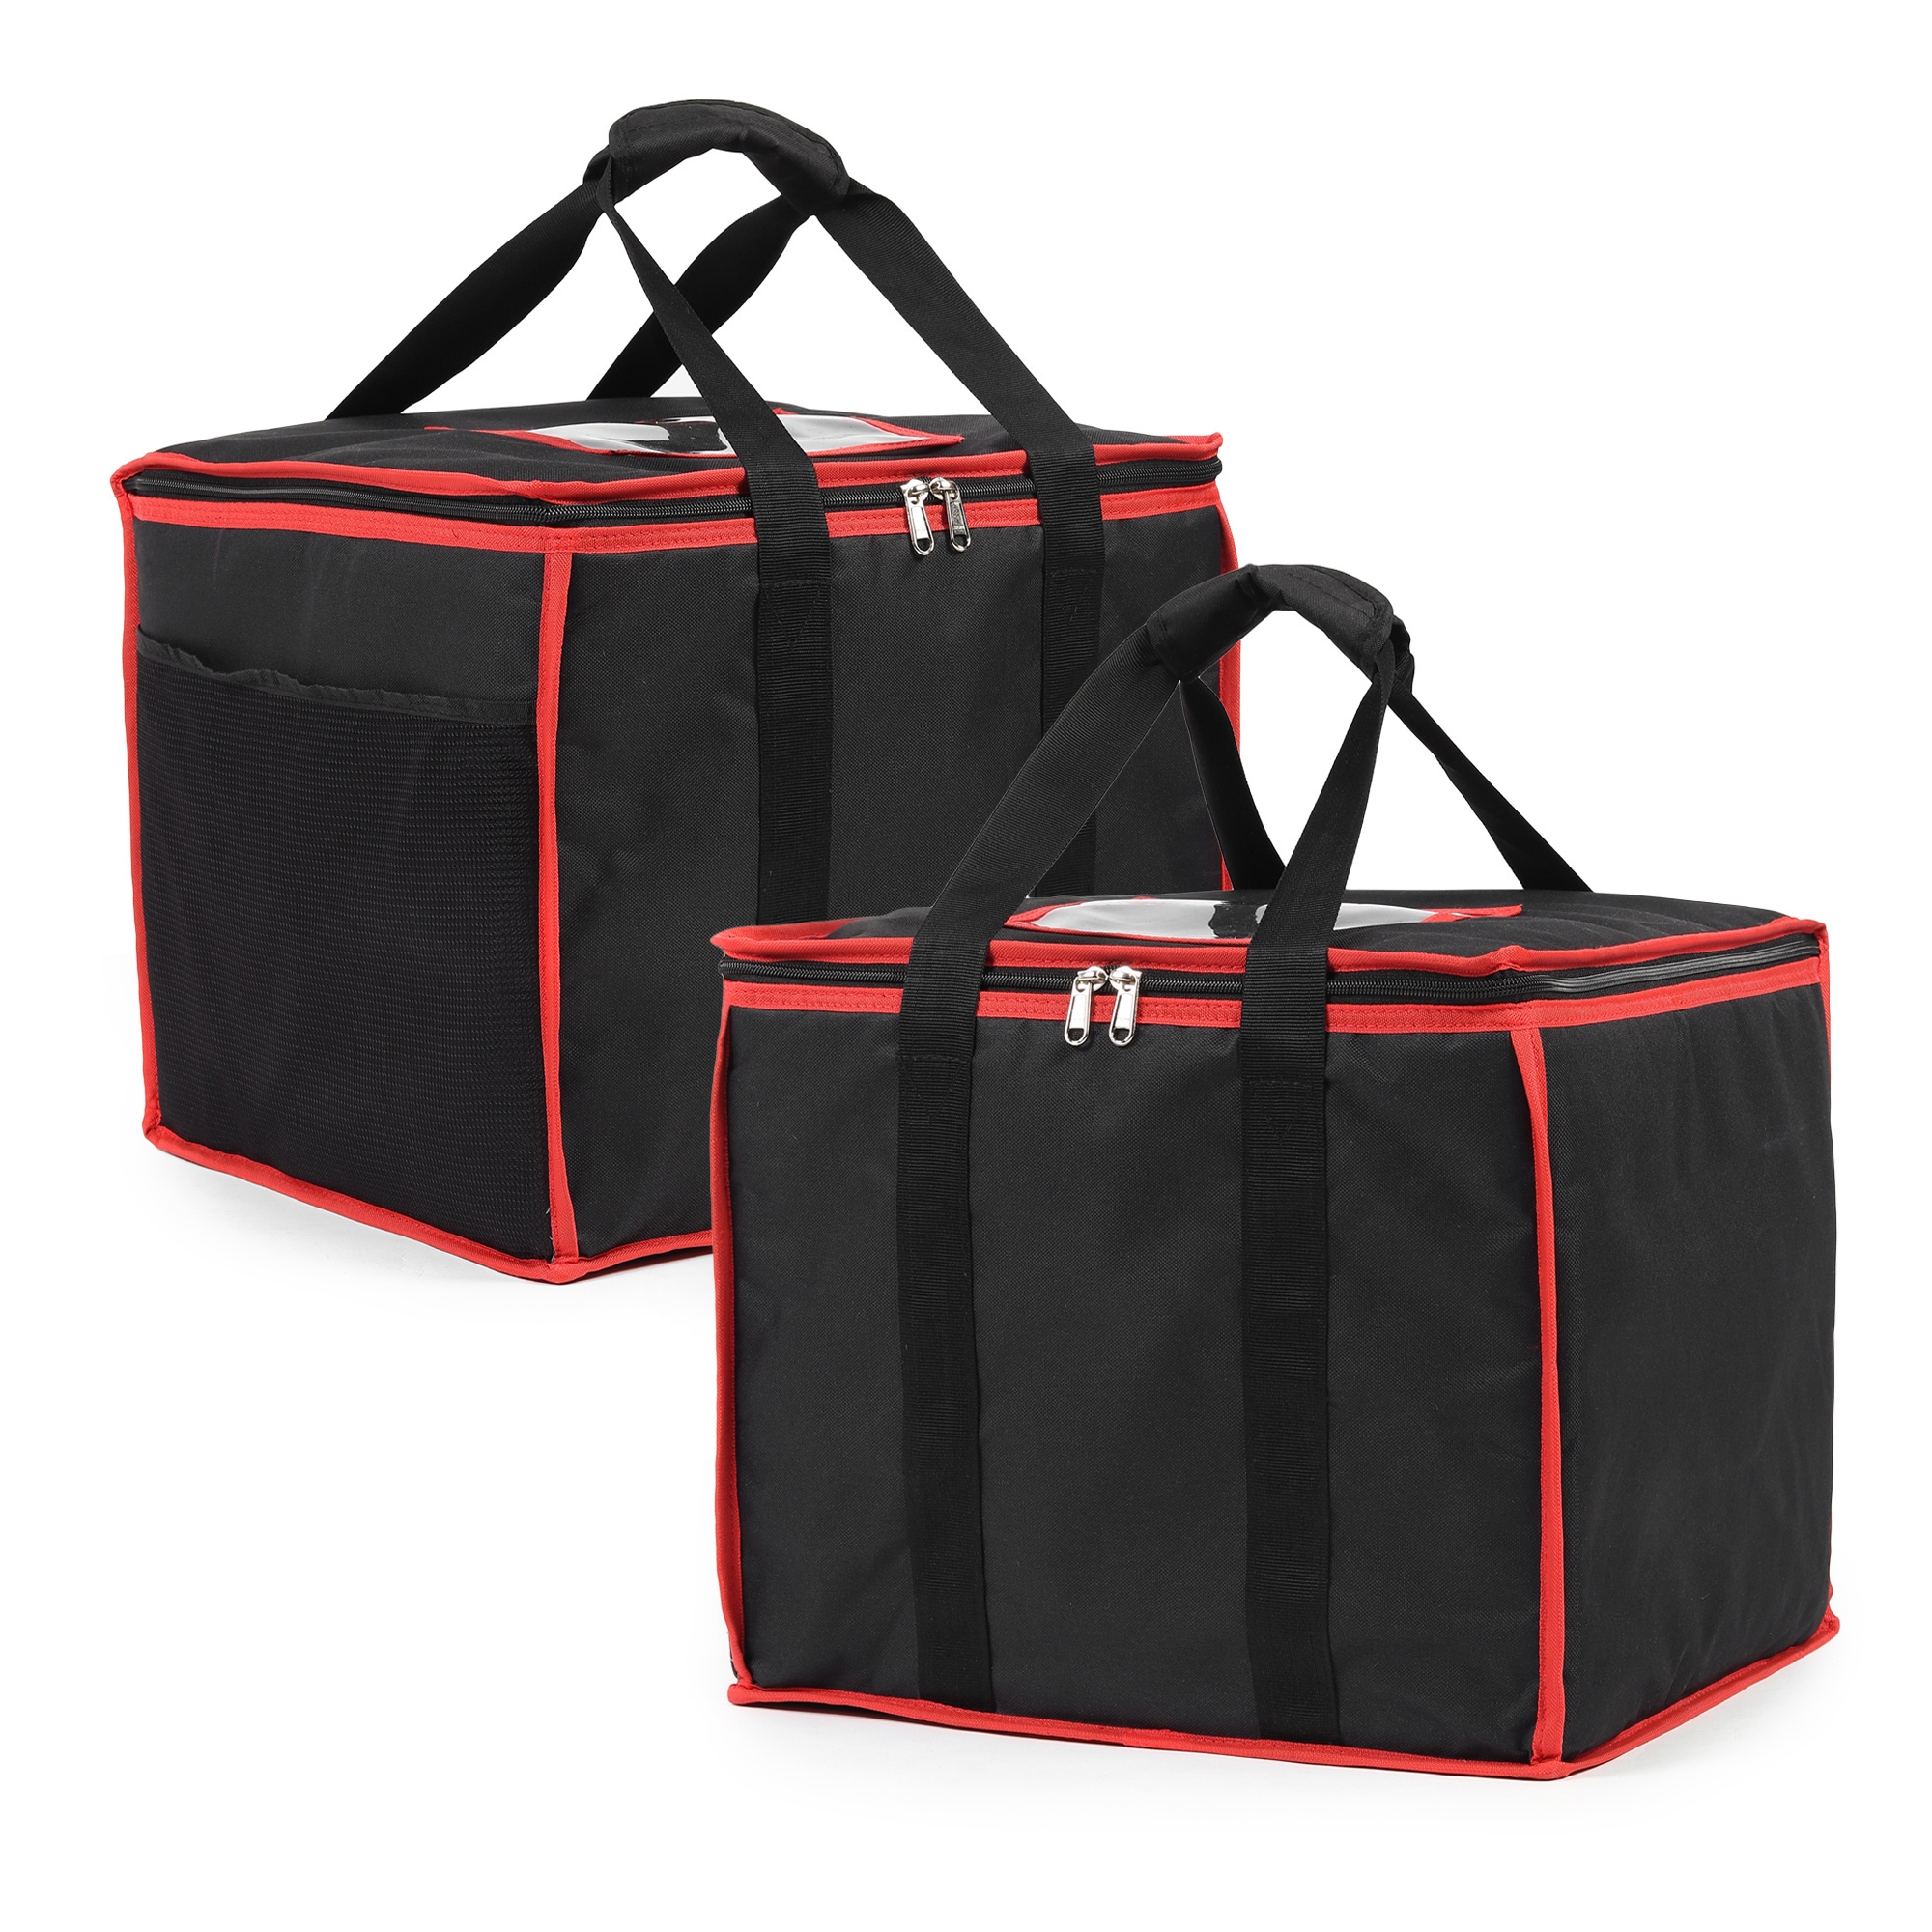 DOUBLE R BAGS | DOUBLE R BAGS Thermal Bags for Cold and hot Food Bag (Red)